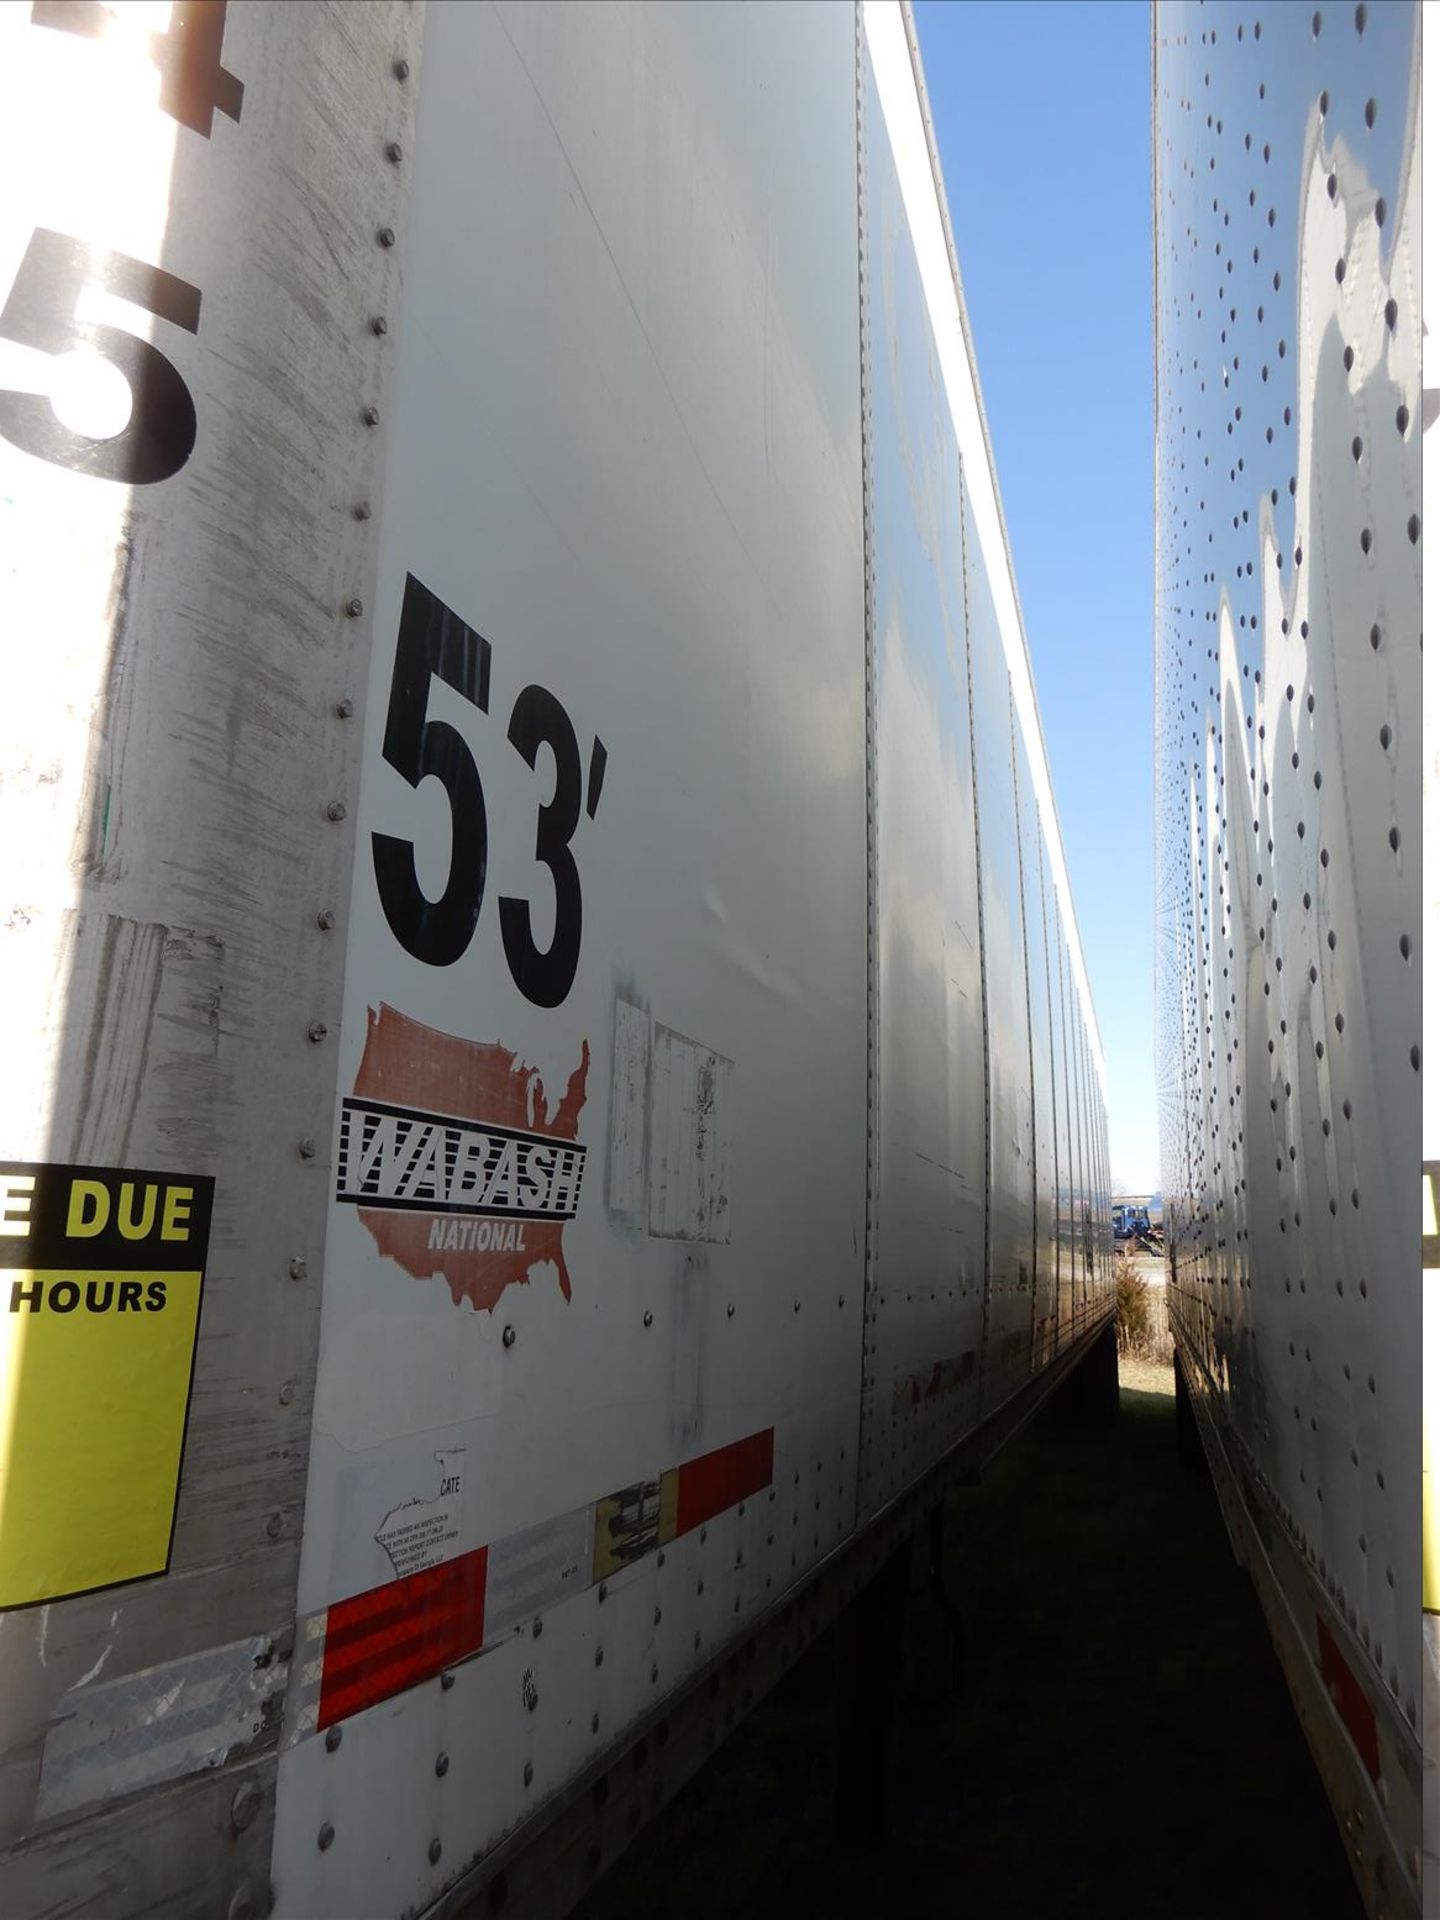 2006 Wabash Trailer - Located in Indianapolis, IN - Image 4 of 30